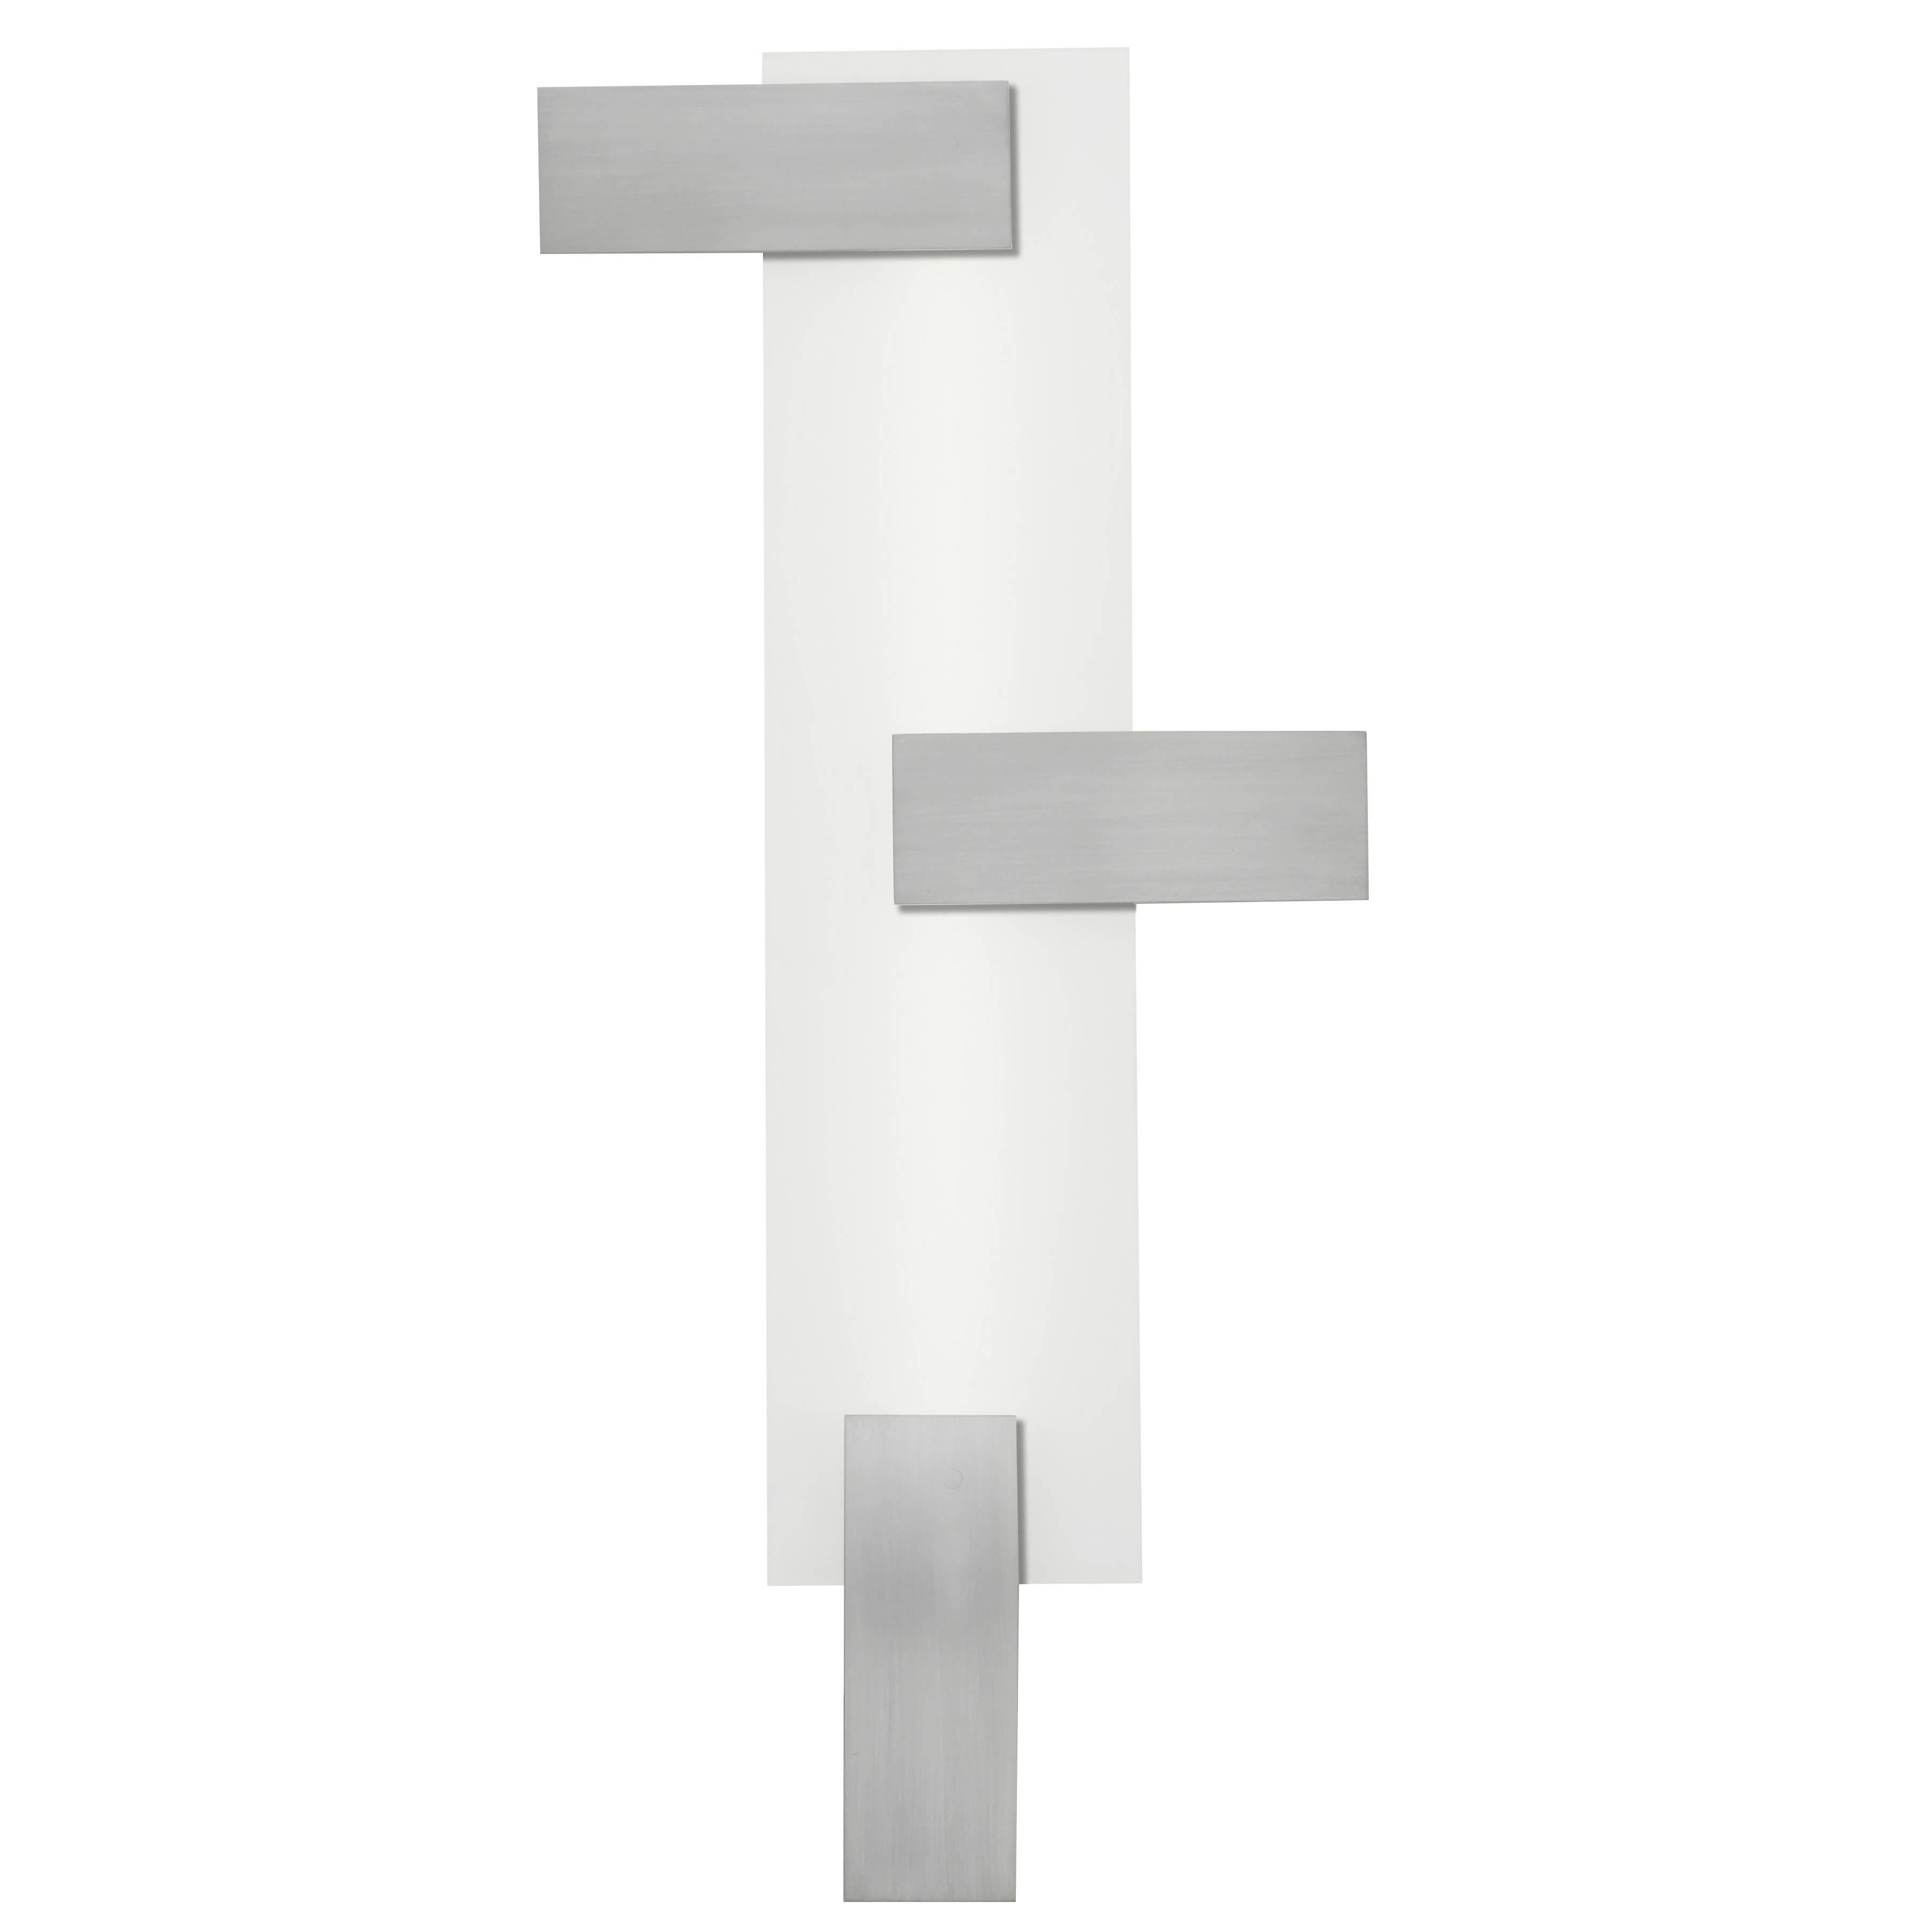 Mid-Century Modern Style Wall Art Sconce Light White Glass with Three Rectangles For Sale